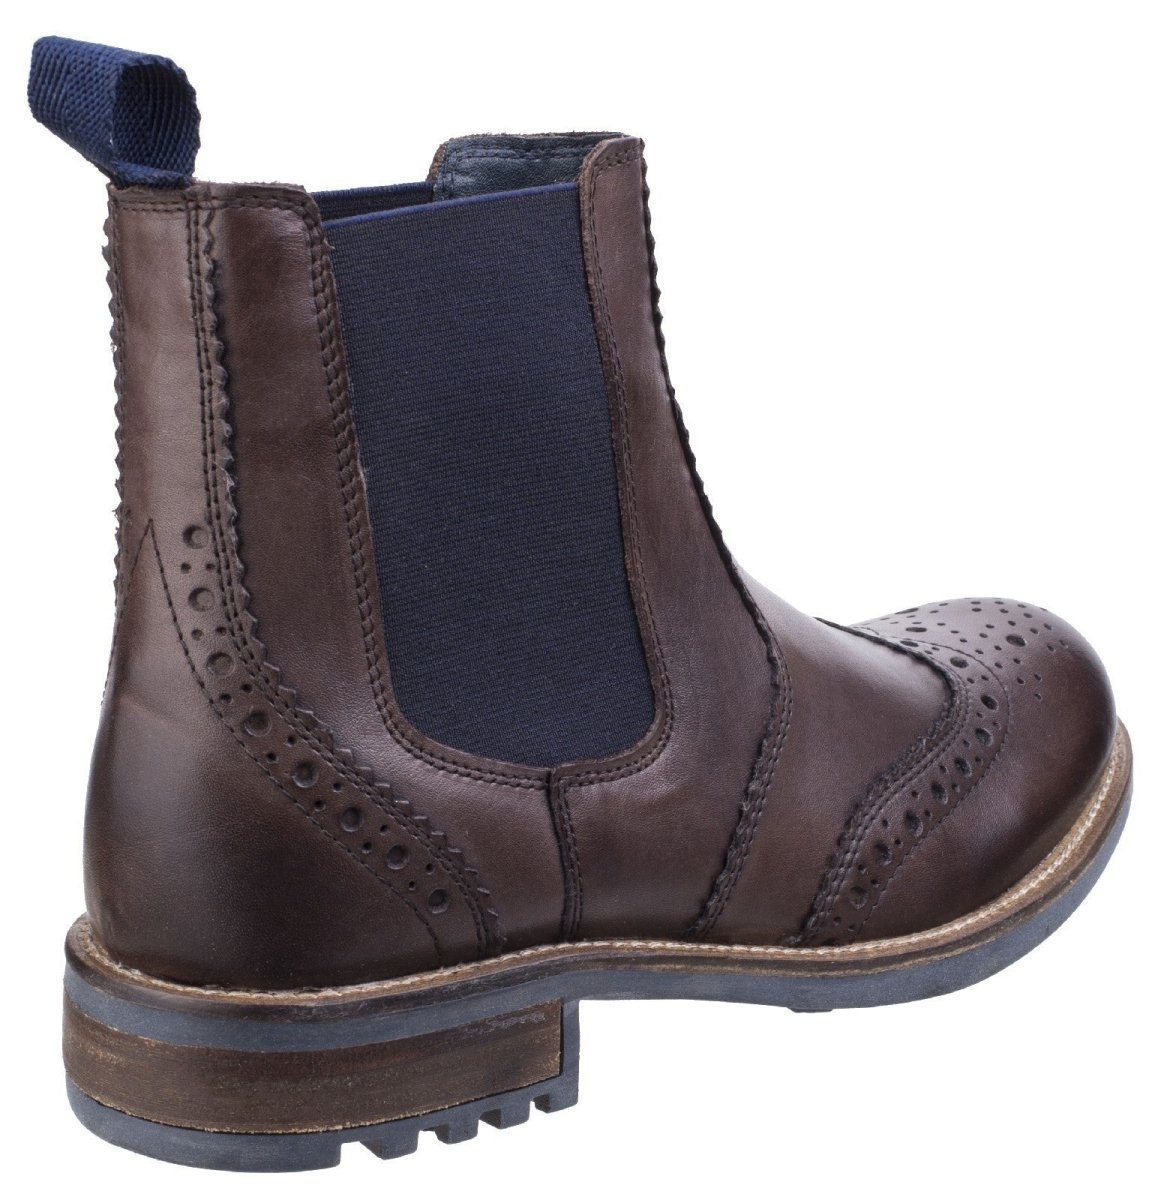 Cotswold Cirencester Chelsea Brogue Mens Boots - Shoe Store Direct